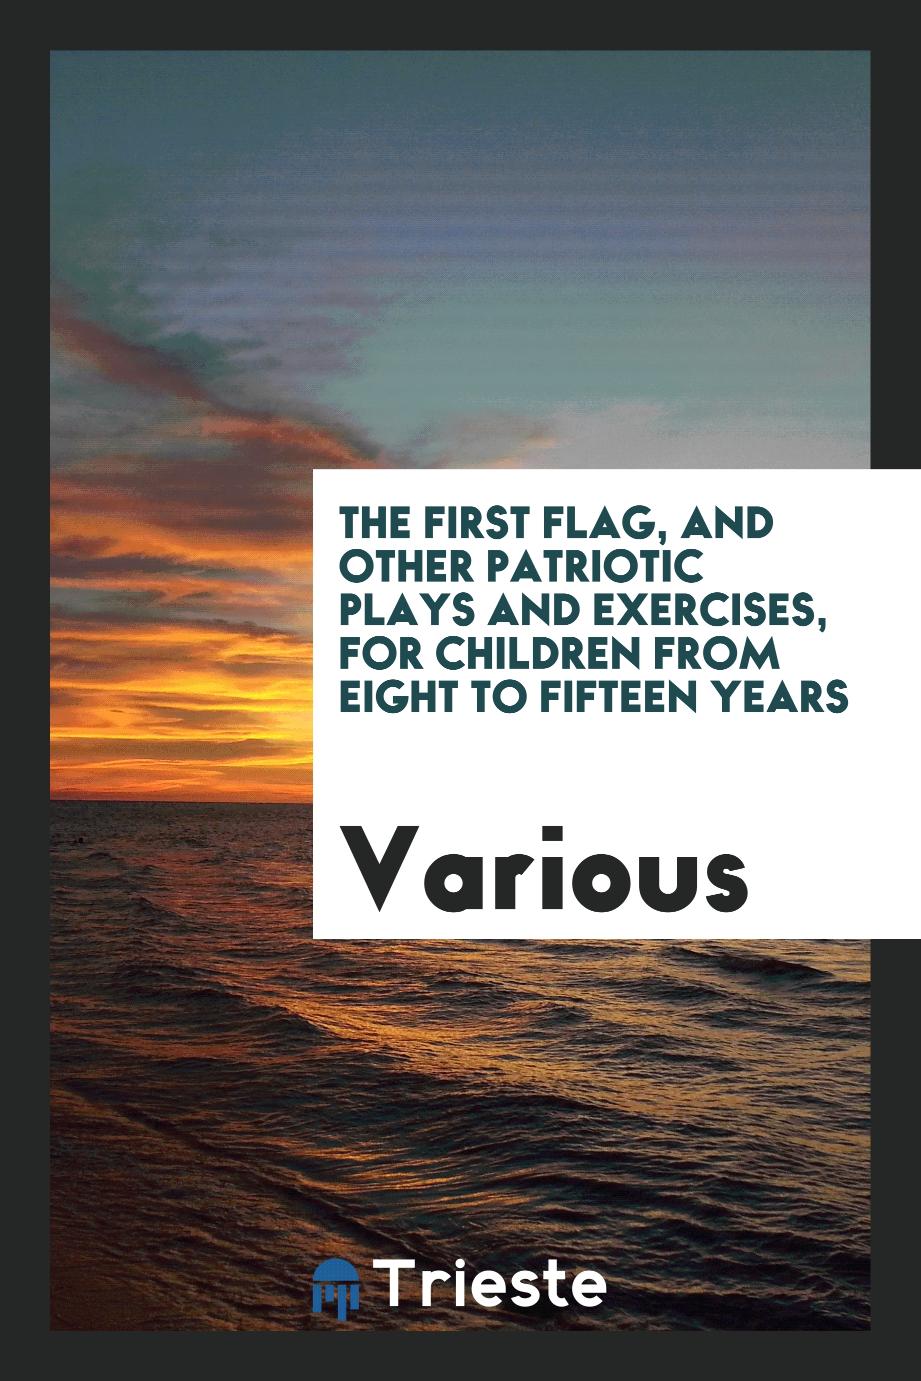 The First Flag, And Other Patriotic Plays and Exercises, for Children from Eight to Fifteen Years